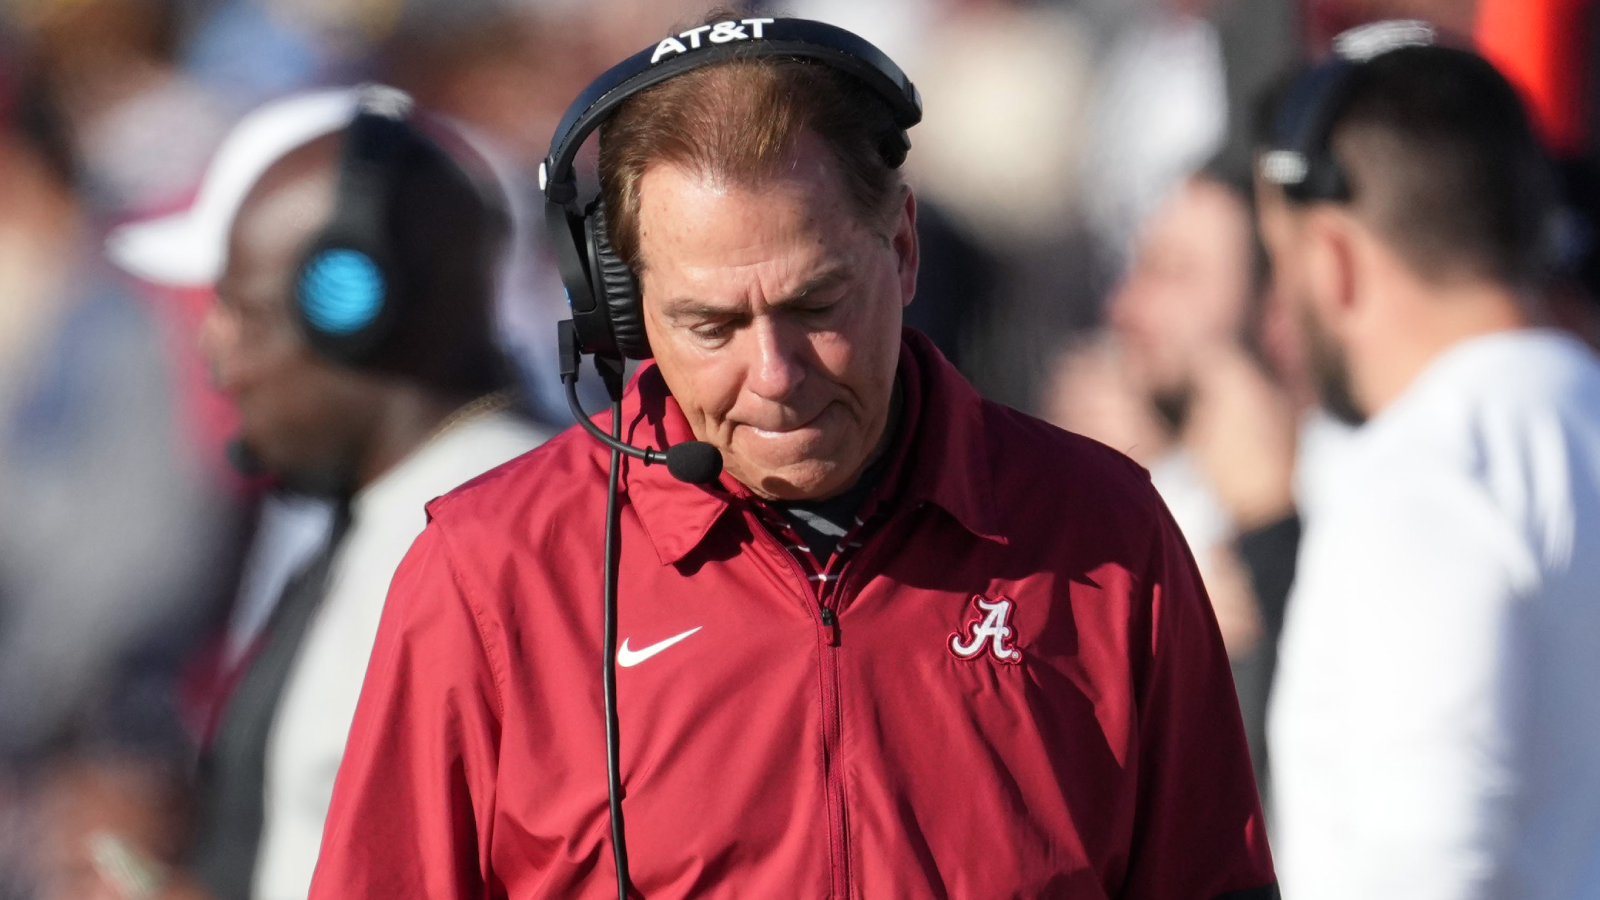 The Surprising Exit of Nick Saban and Impact on College Football